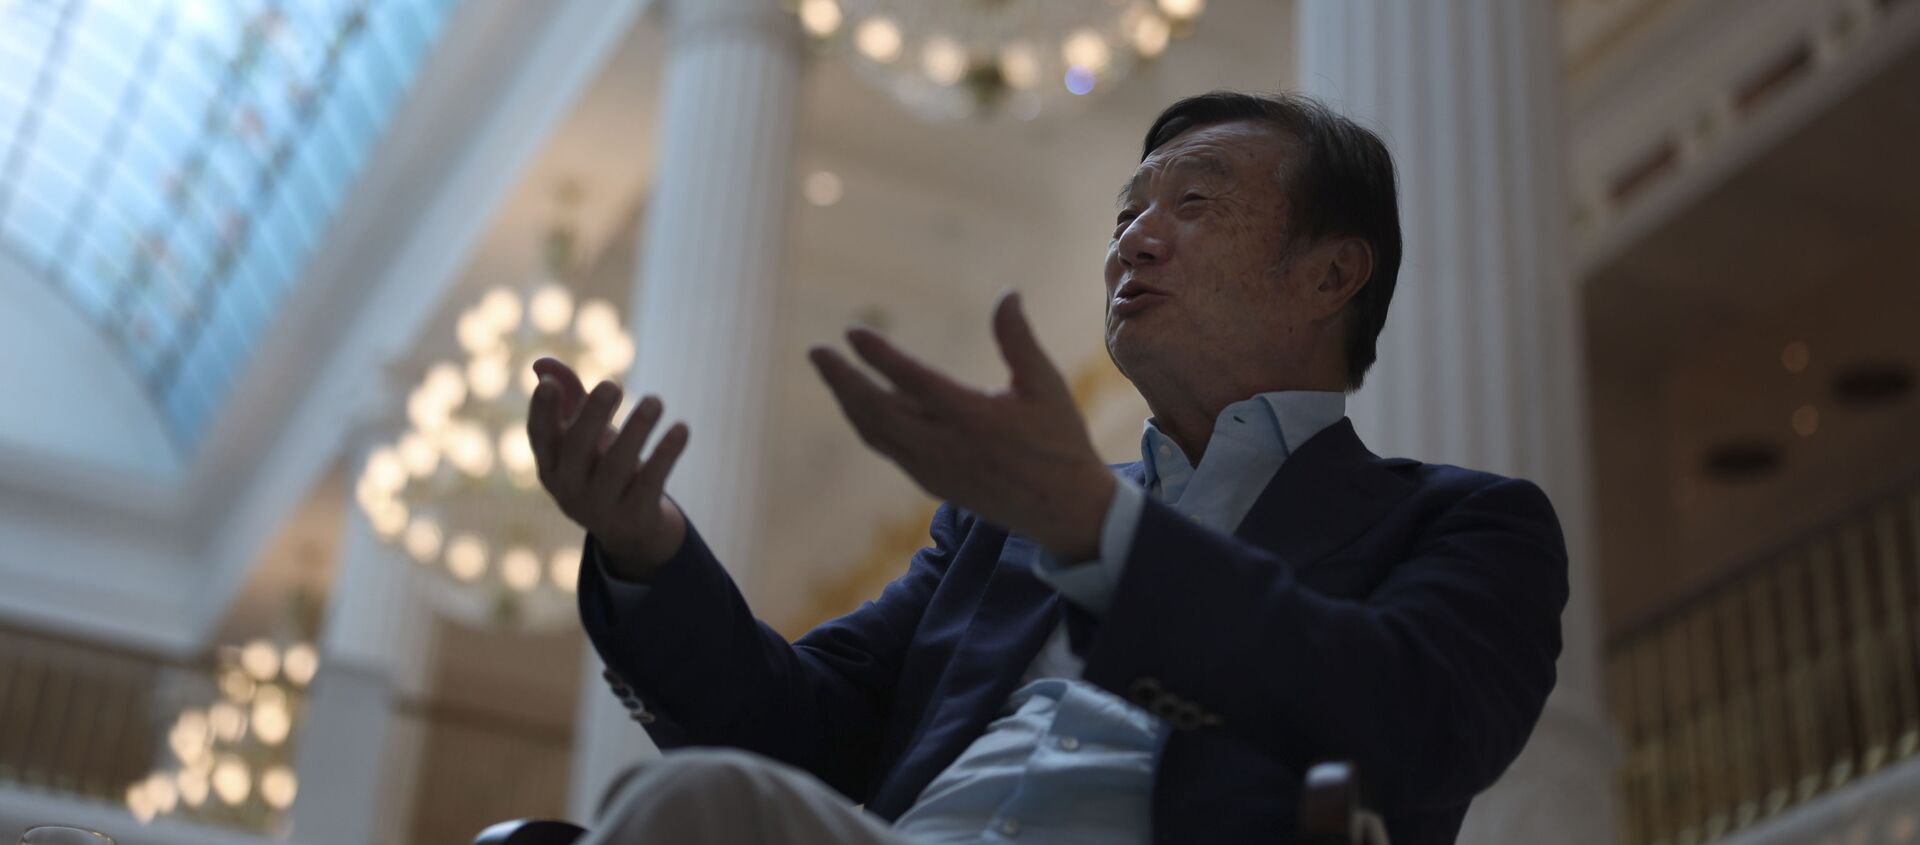 Huawei's founder Ren Zhengfei, speaks during an interview at the Huawei campus in Shenzhen in Southern China's Guangdong province on Tuesday, Aug. 20, 2019. - Sputnik International, 1920, 24.05.2021